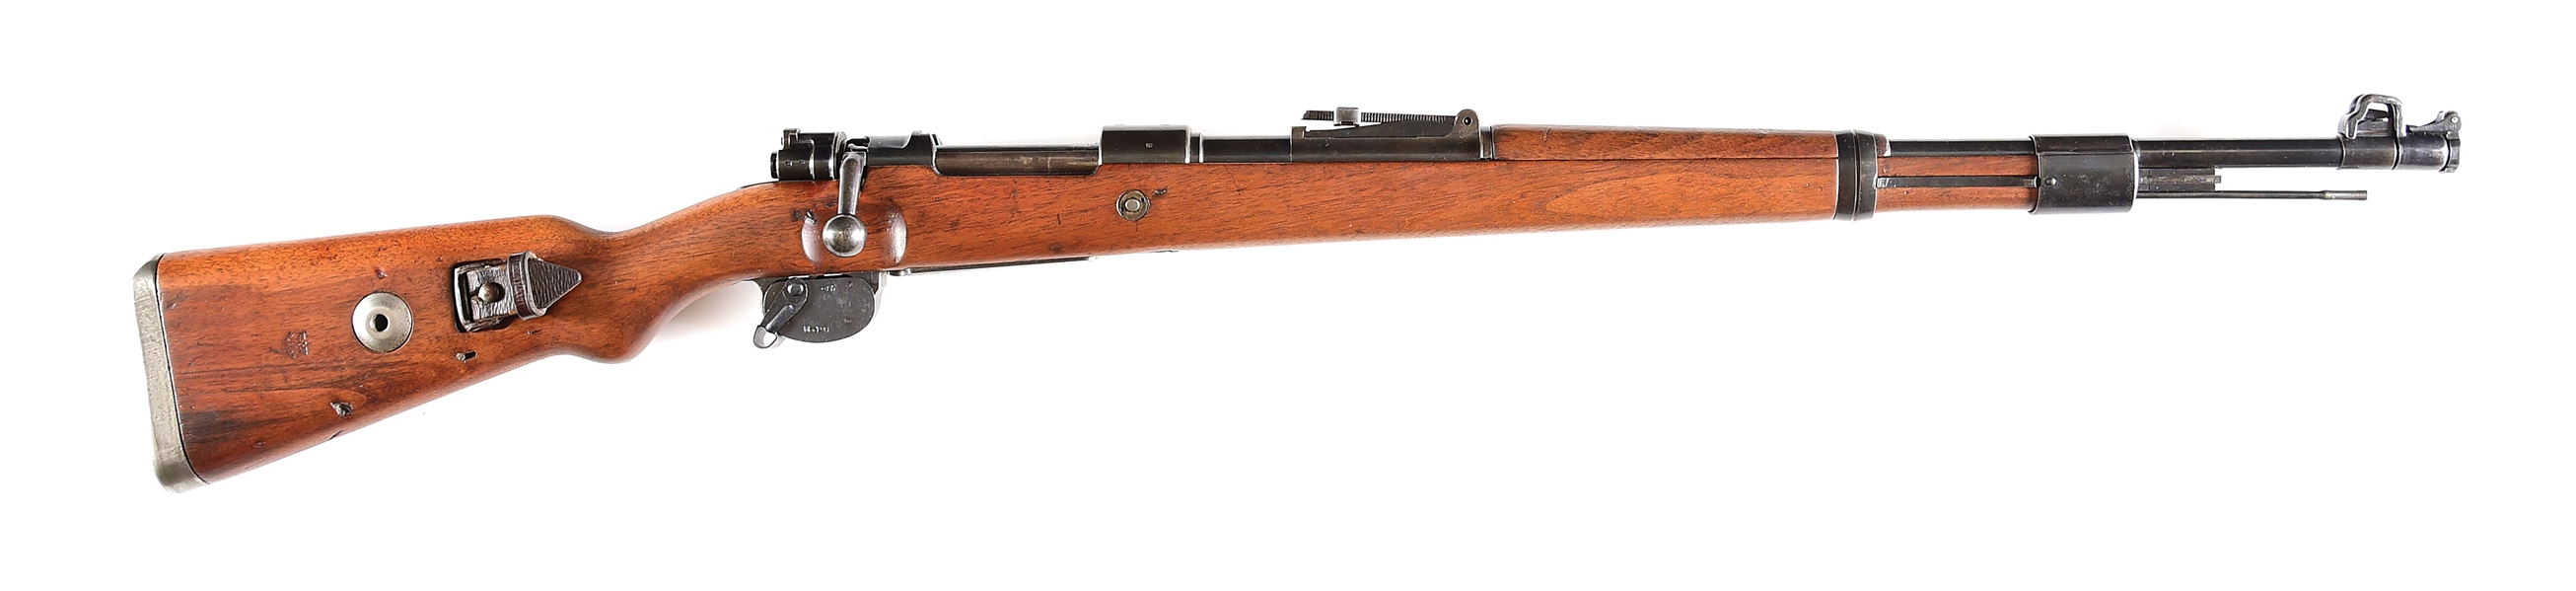 (C) GERMAN WORLD WAR II MAUSER "BYF/43" CODE K98K BOLT ACTION RIFLE WITH WINTER TRIGGER & MUZZLE COVER.